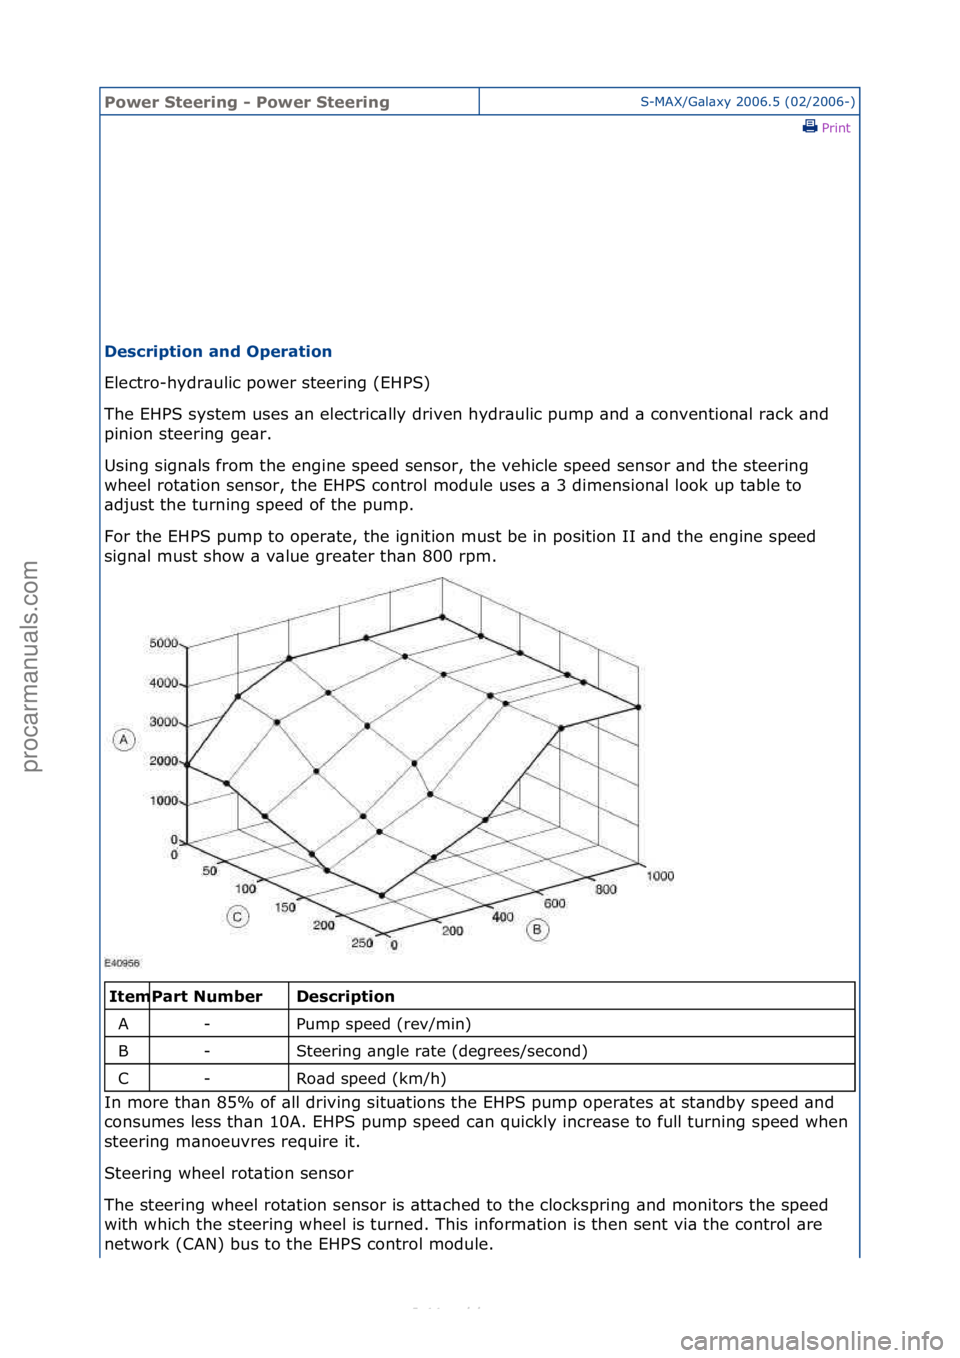 FORD S-MAX 2006  Service Repair Manual Power S\beering \f Power S\beeringS-MAX/G\bl\bxy\f2006.5\f(02/2006-)\fPrint \f
Descrip\bion and Opera\bion 
Electro-hydr\bulic\fpower\fsteering\f(EHPS)\f
Th

e\fEHPS\fsystem\fuses\f\bn\felectric\blly\